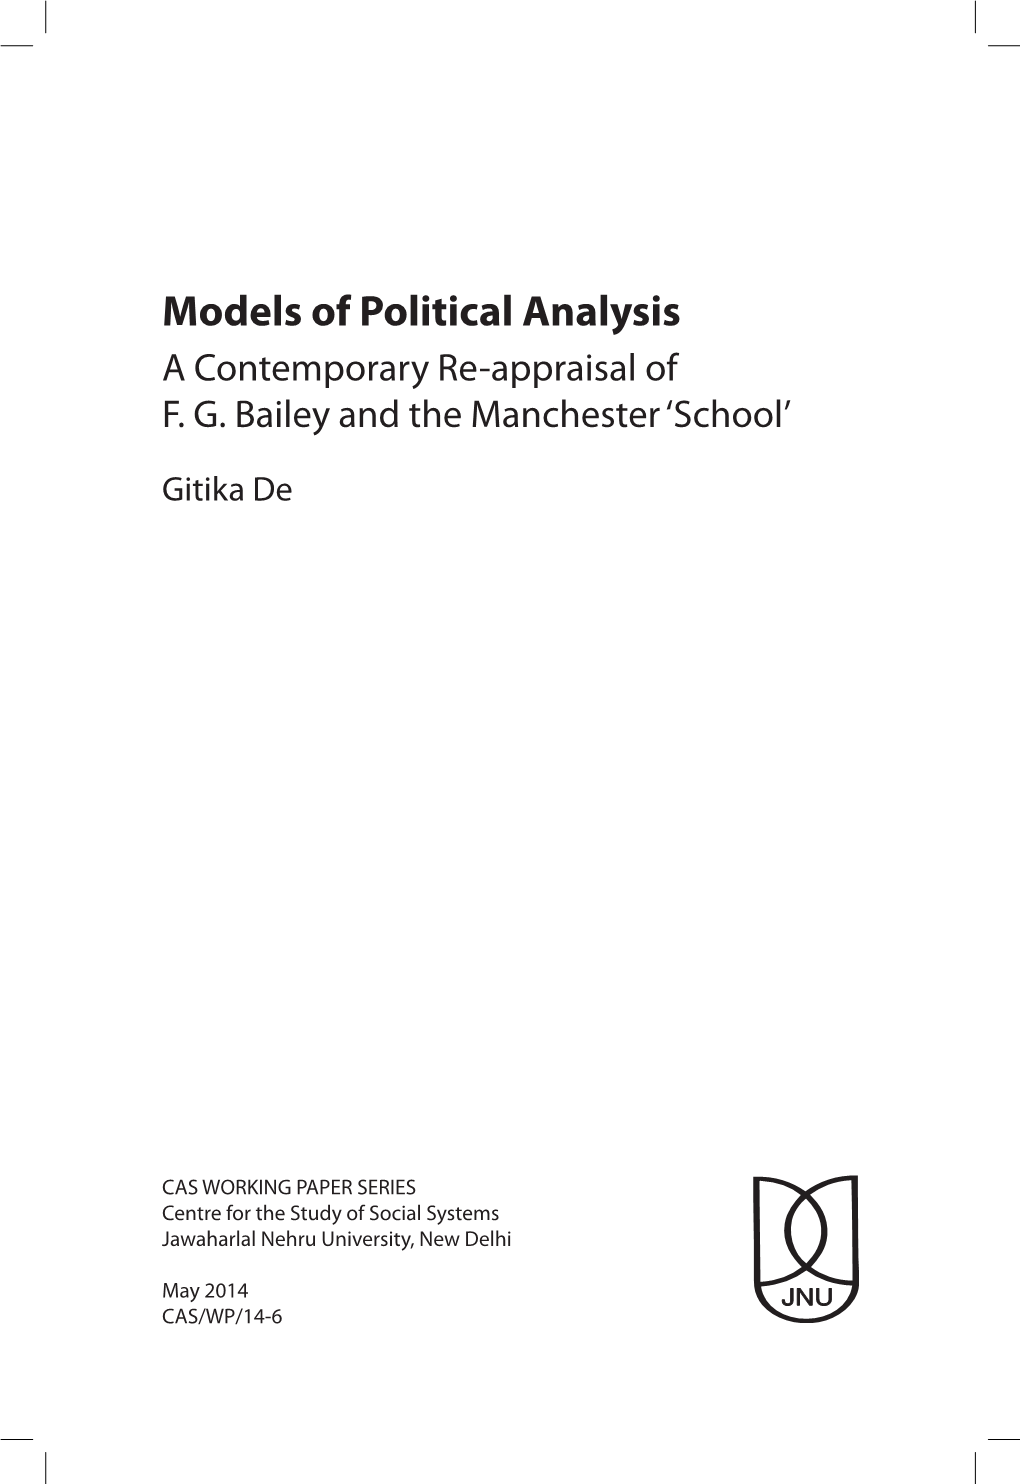 Models of Political Analysis a Contemporary Re-Appraisal of F